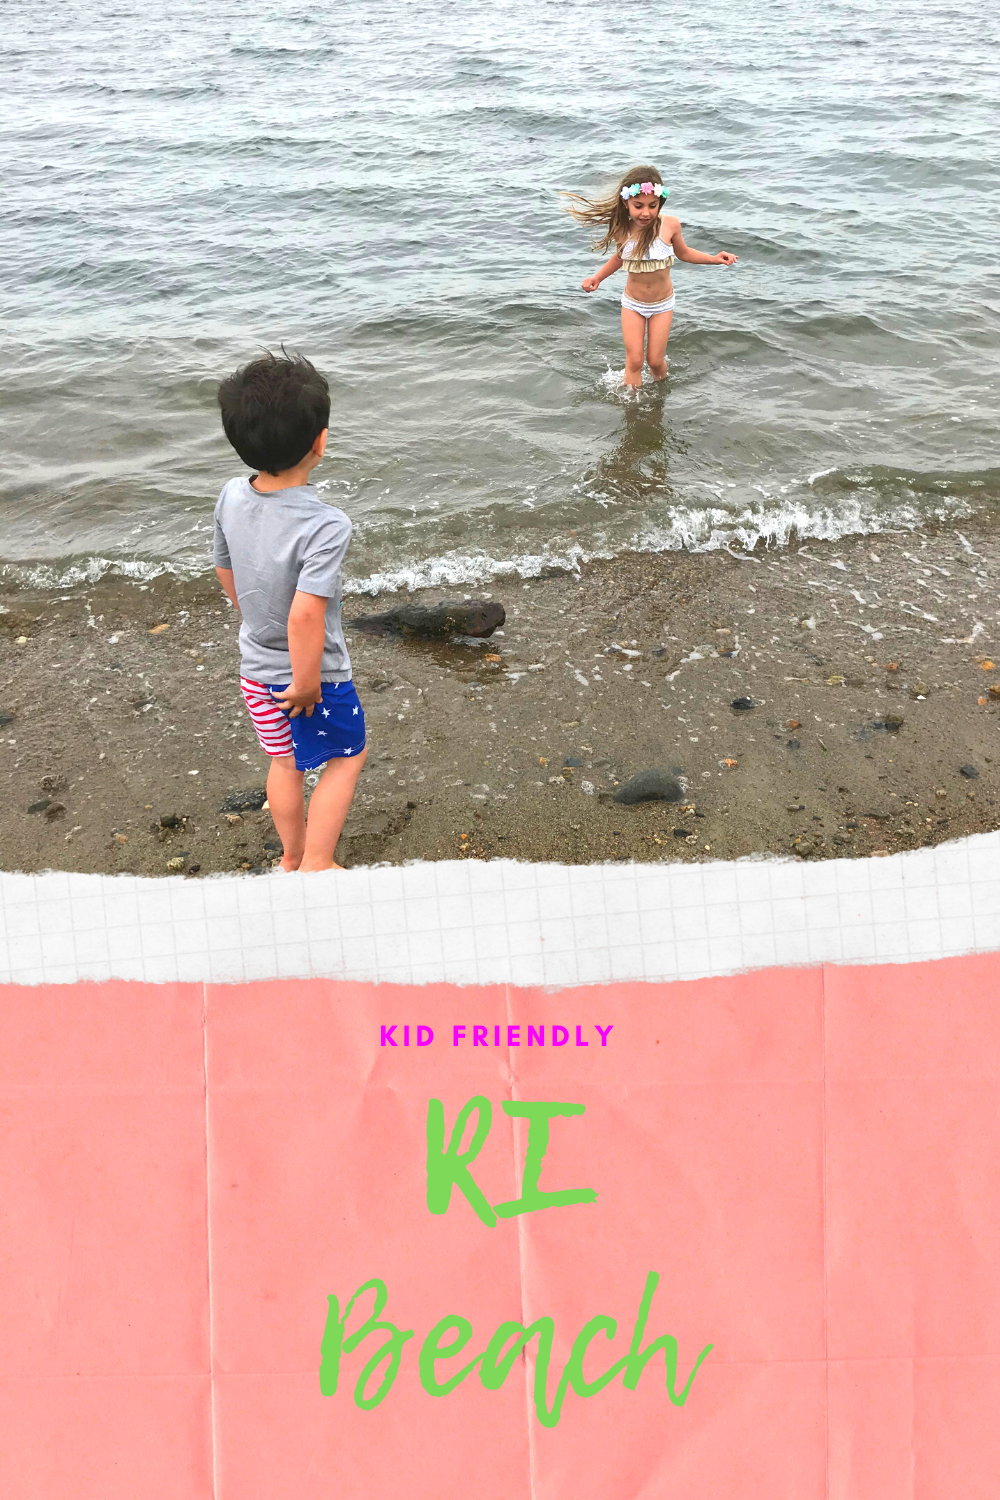 North Kingstown Town Beach with kids